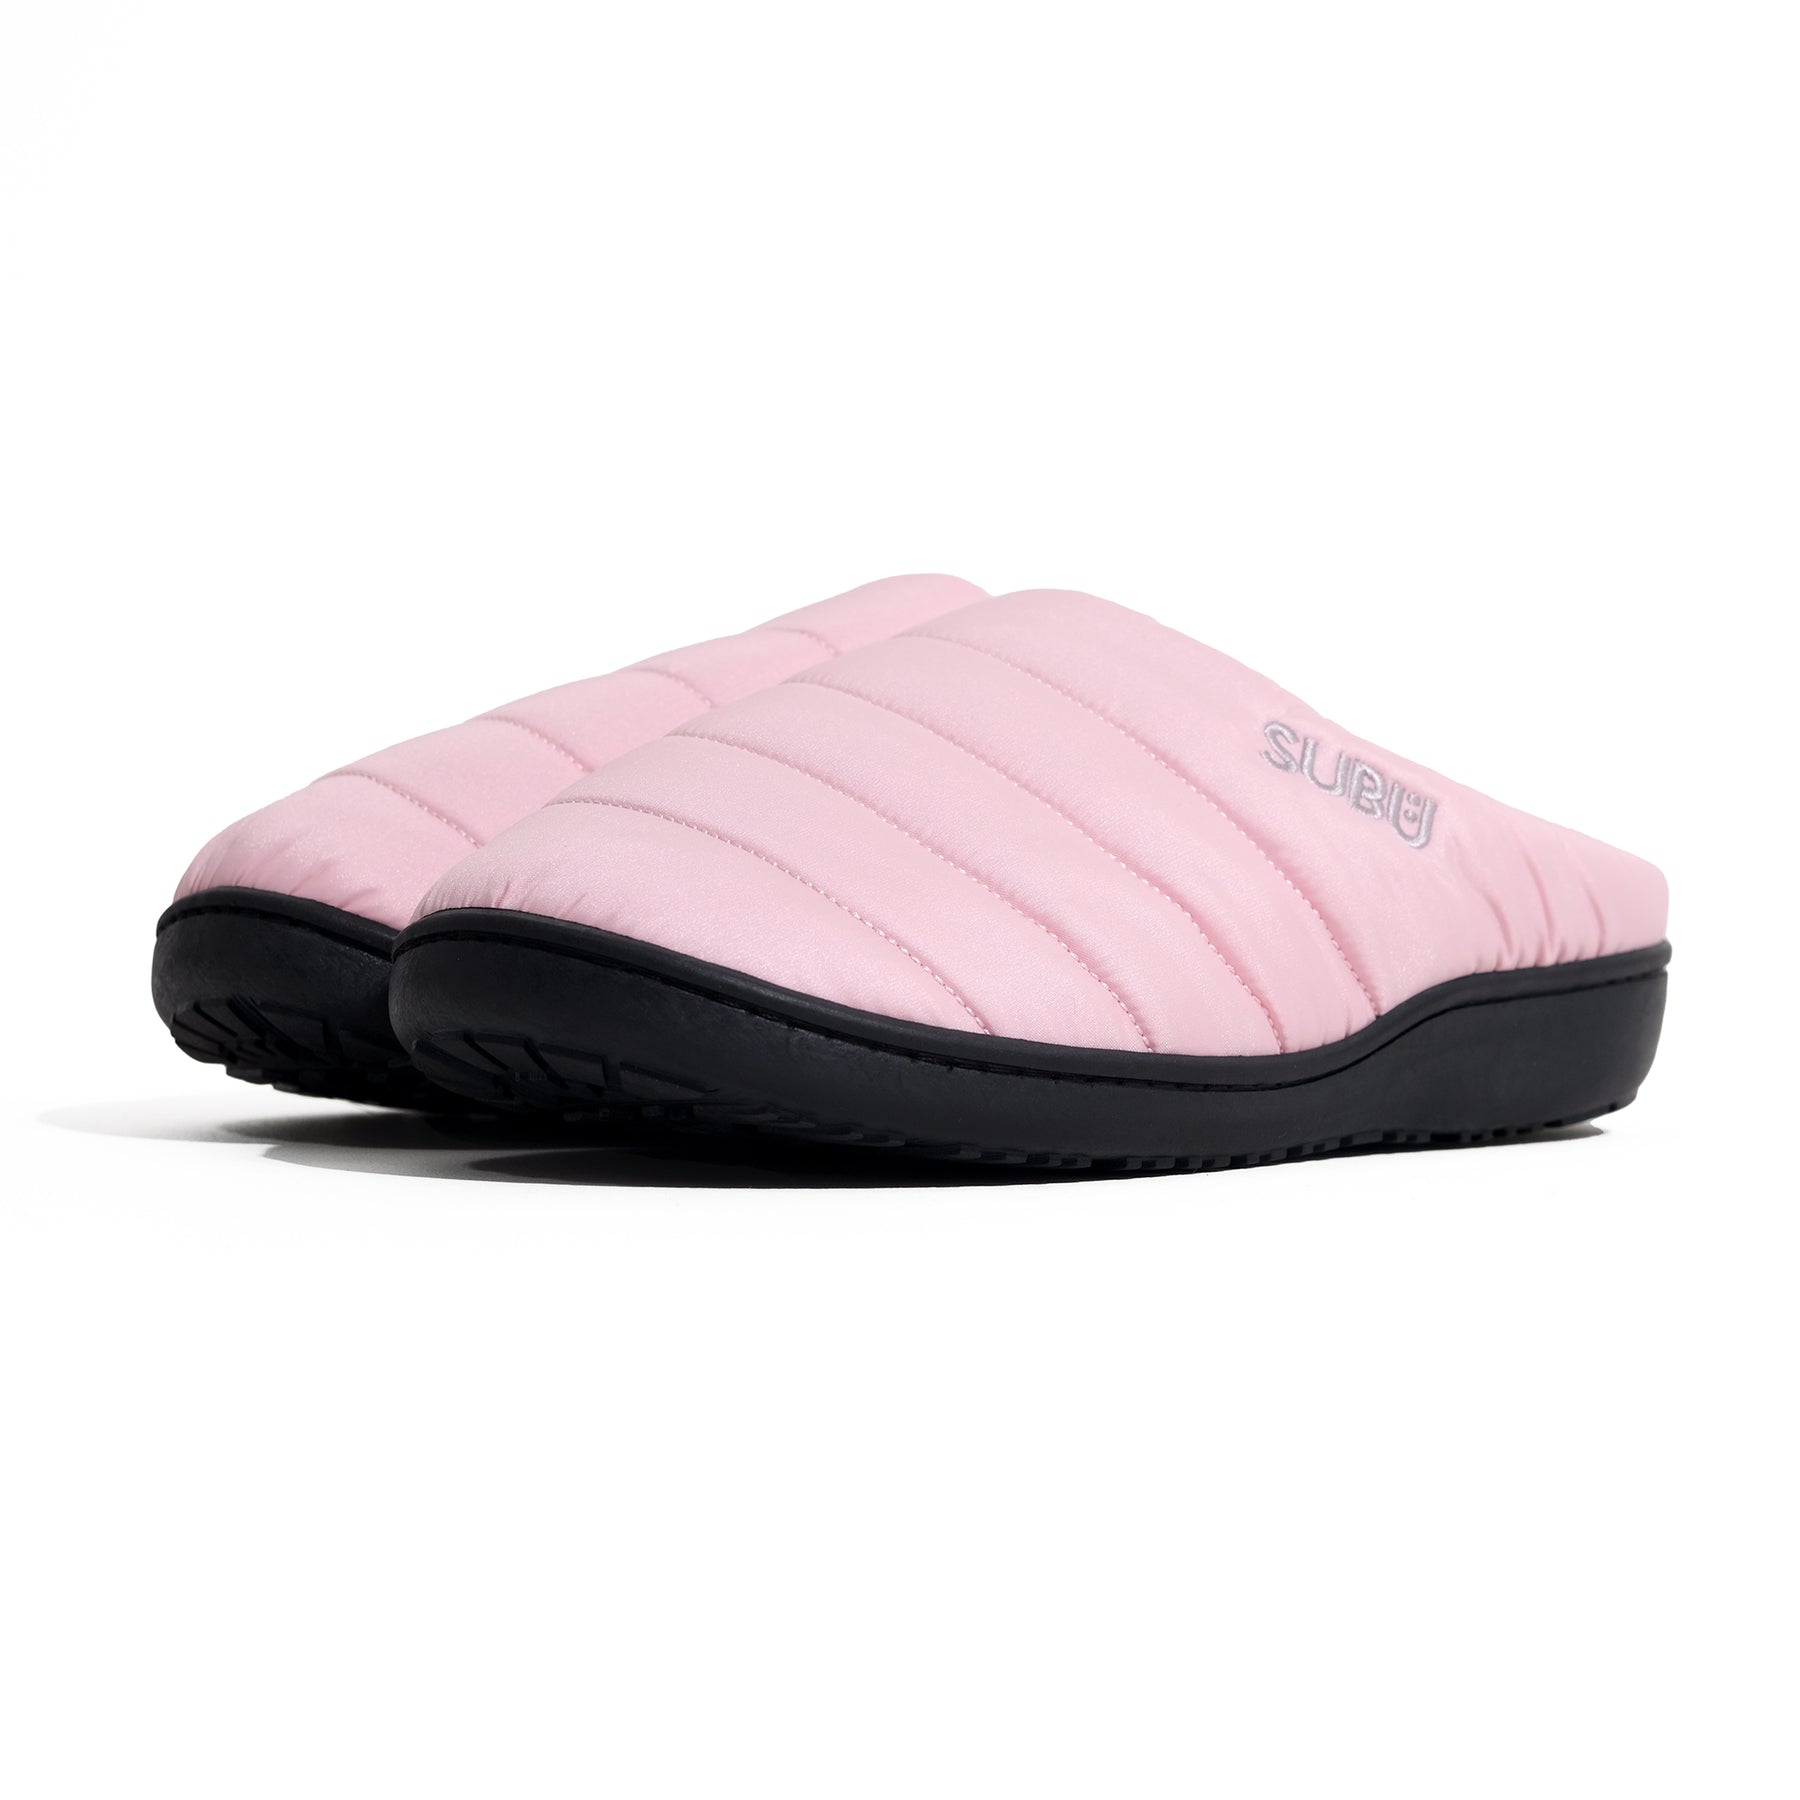 AMEICO - Official US & - of Winter Fall SUBU Slippers - Pink Distributor